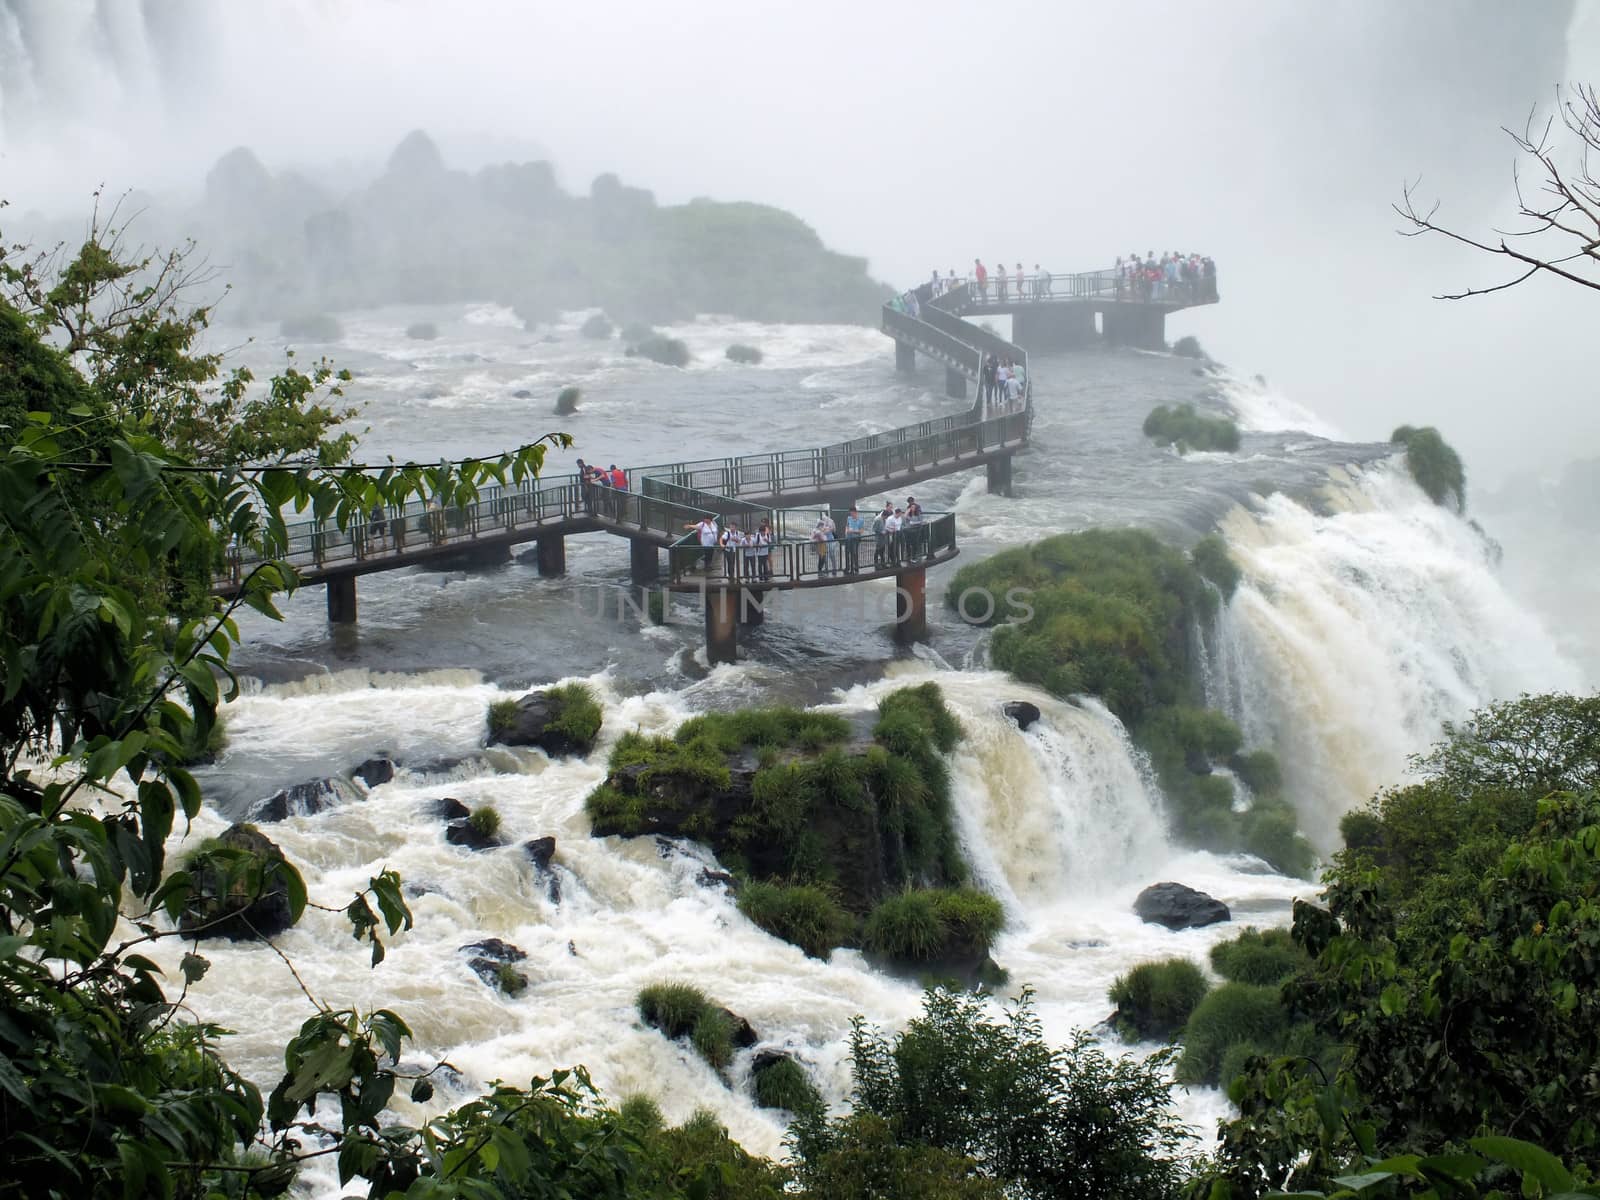 It is possible to walk to the bottom of the Santa Maria Falls on the Brazilian side of the Iguazu Falls. The Iguazu National Park is a UNESCO World Heritage listed site and a popular tourist attraction on the border between Brazil and Argentina.